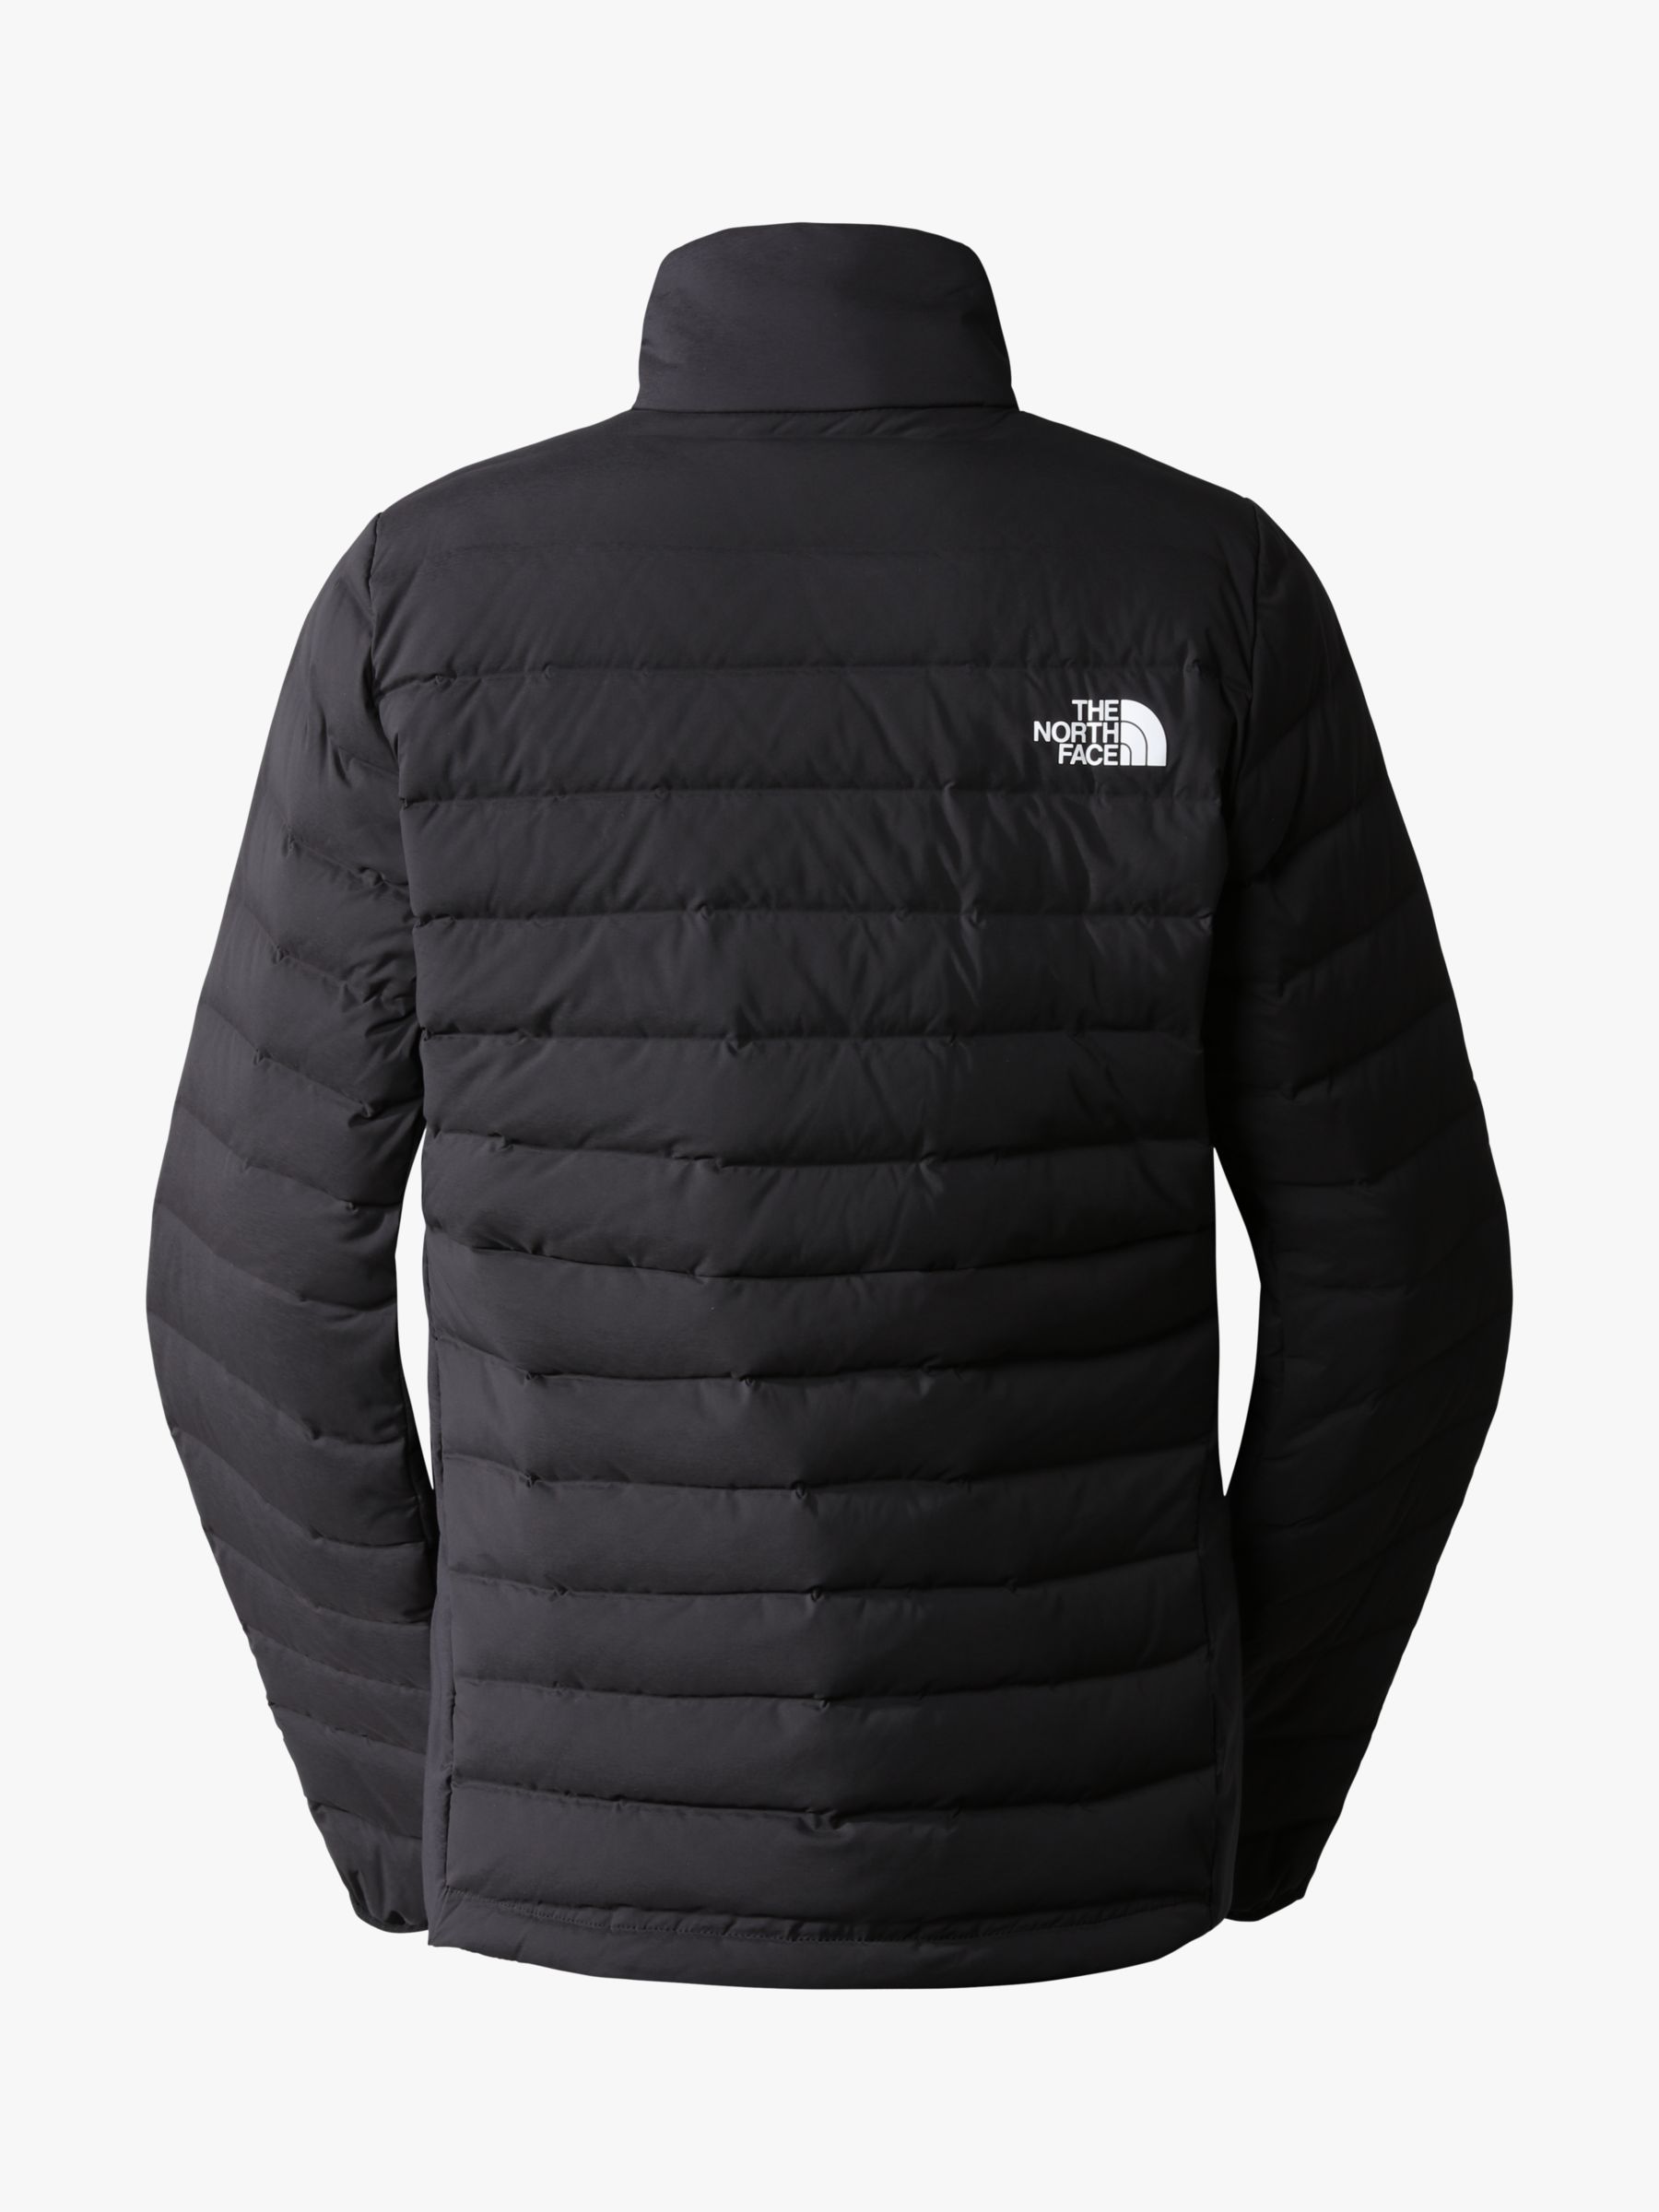 The North Face Belleview Women's Stretch Down Jacket